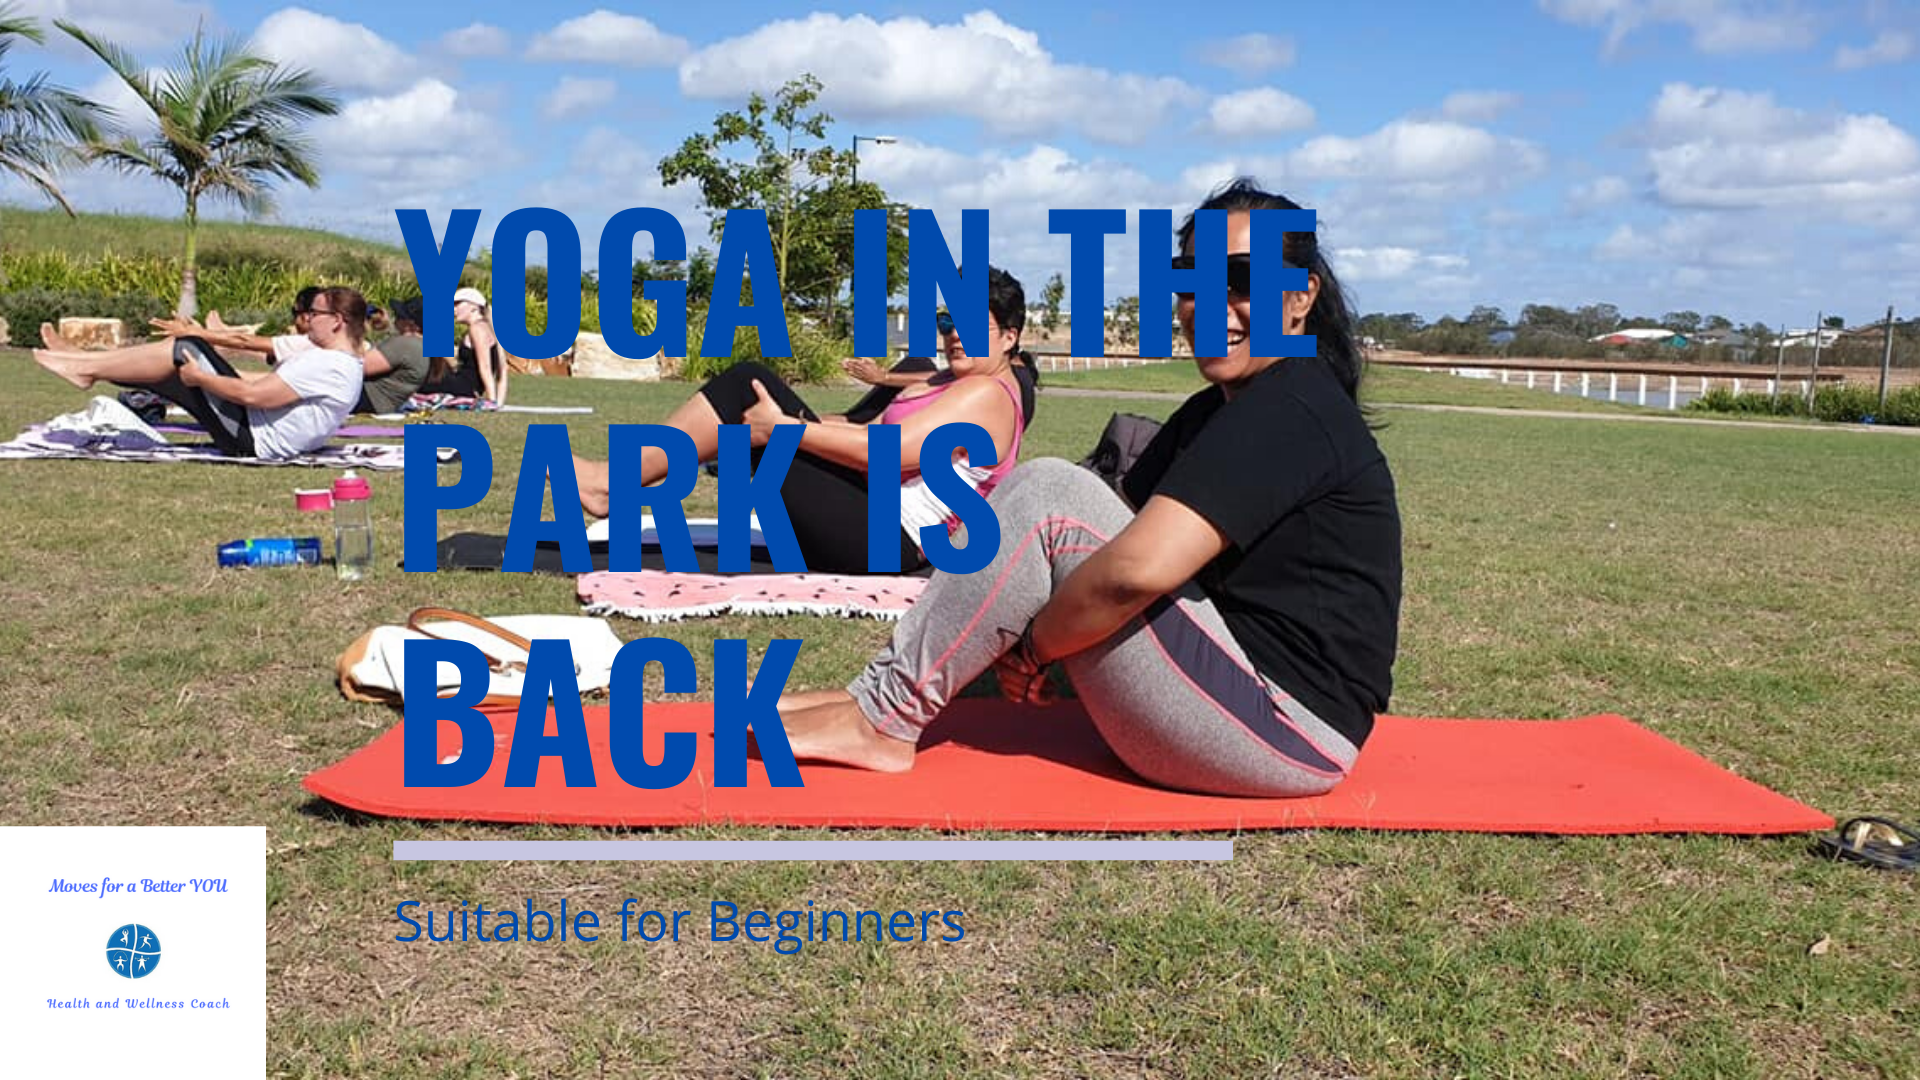 Yoga in the park